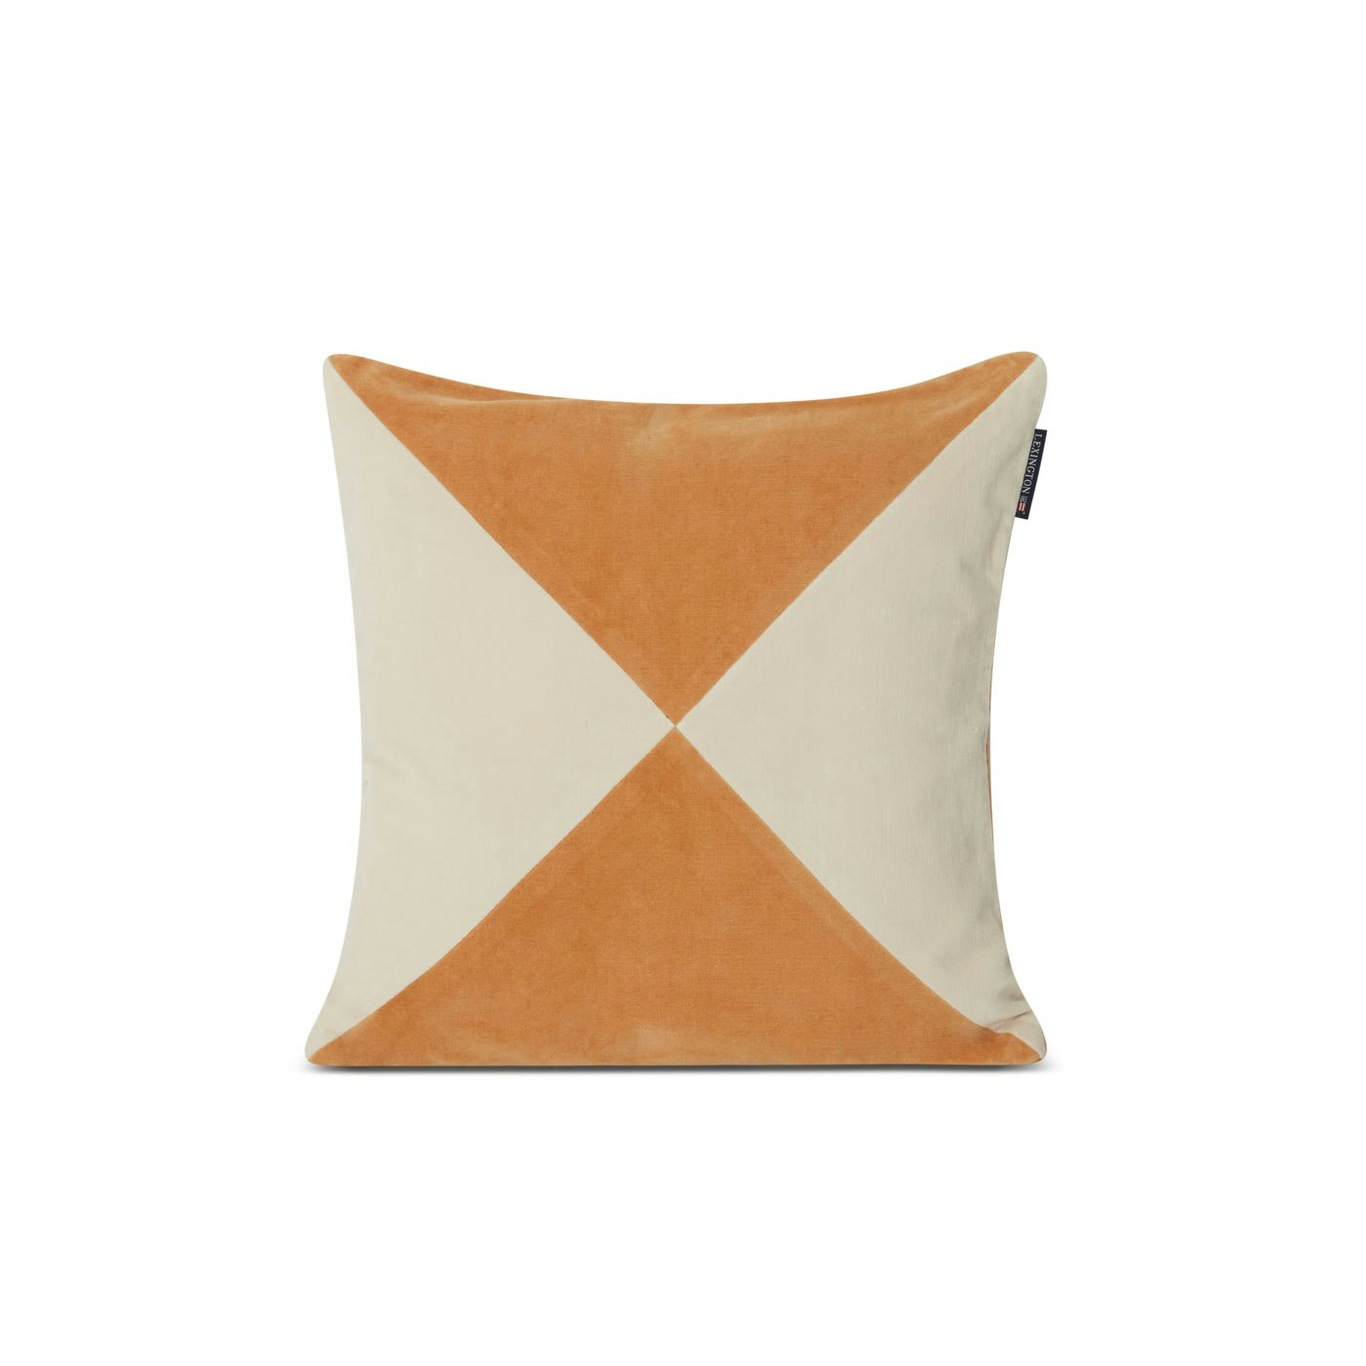 Patched Organic Cotton Velvet Pillow Cover